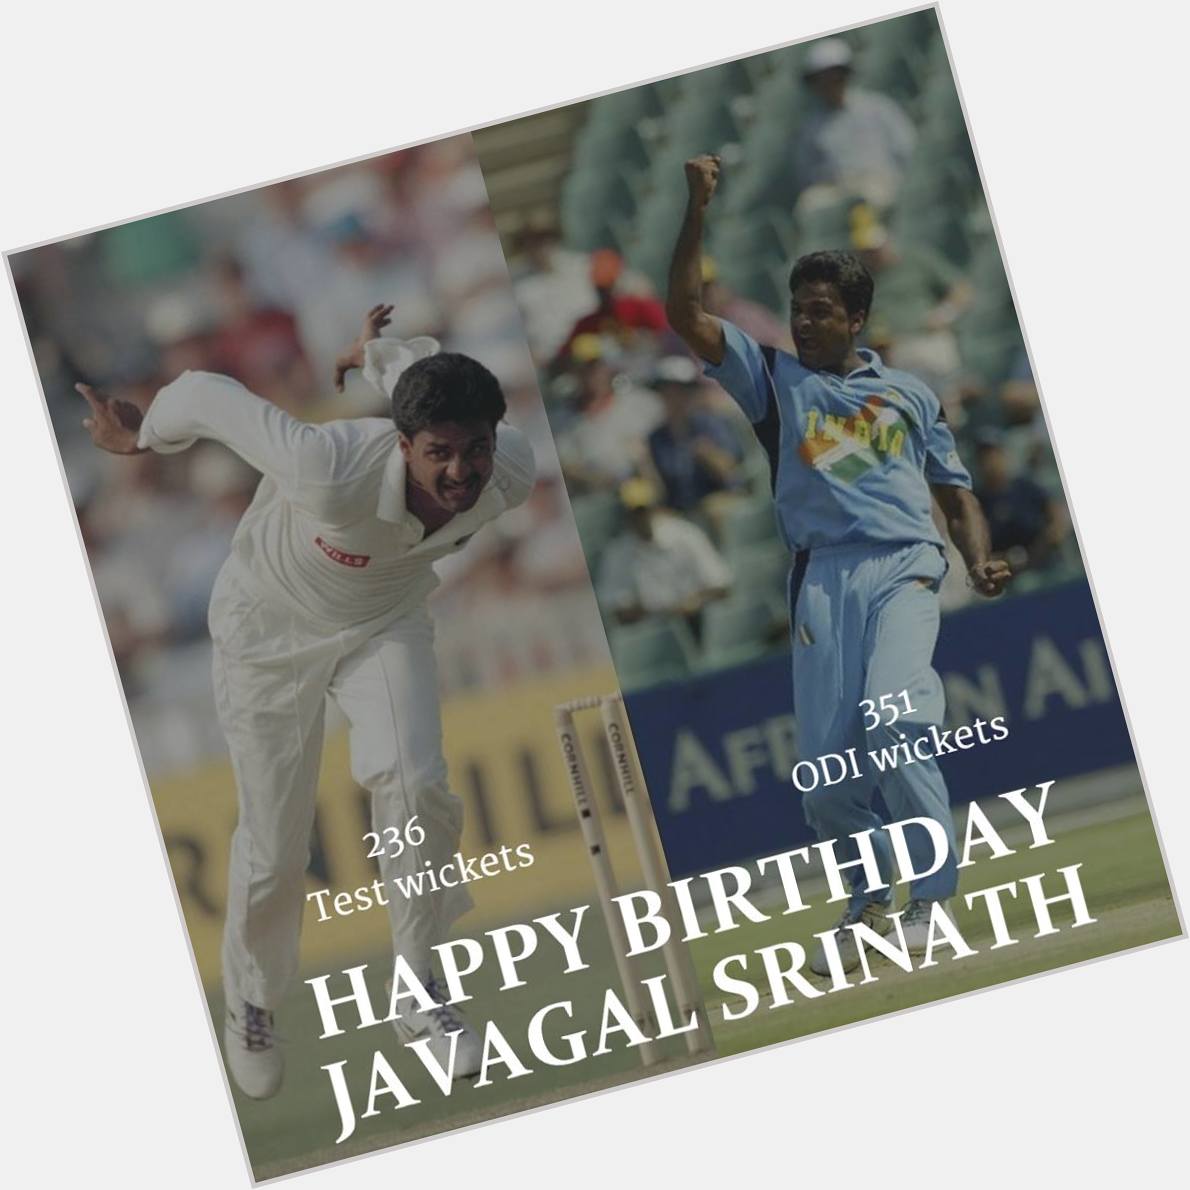 Here\s wishing one of India\s greatest fast bowlers a Happy Birthday! 

Javagal Srinath turns 46 today. 